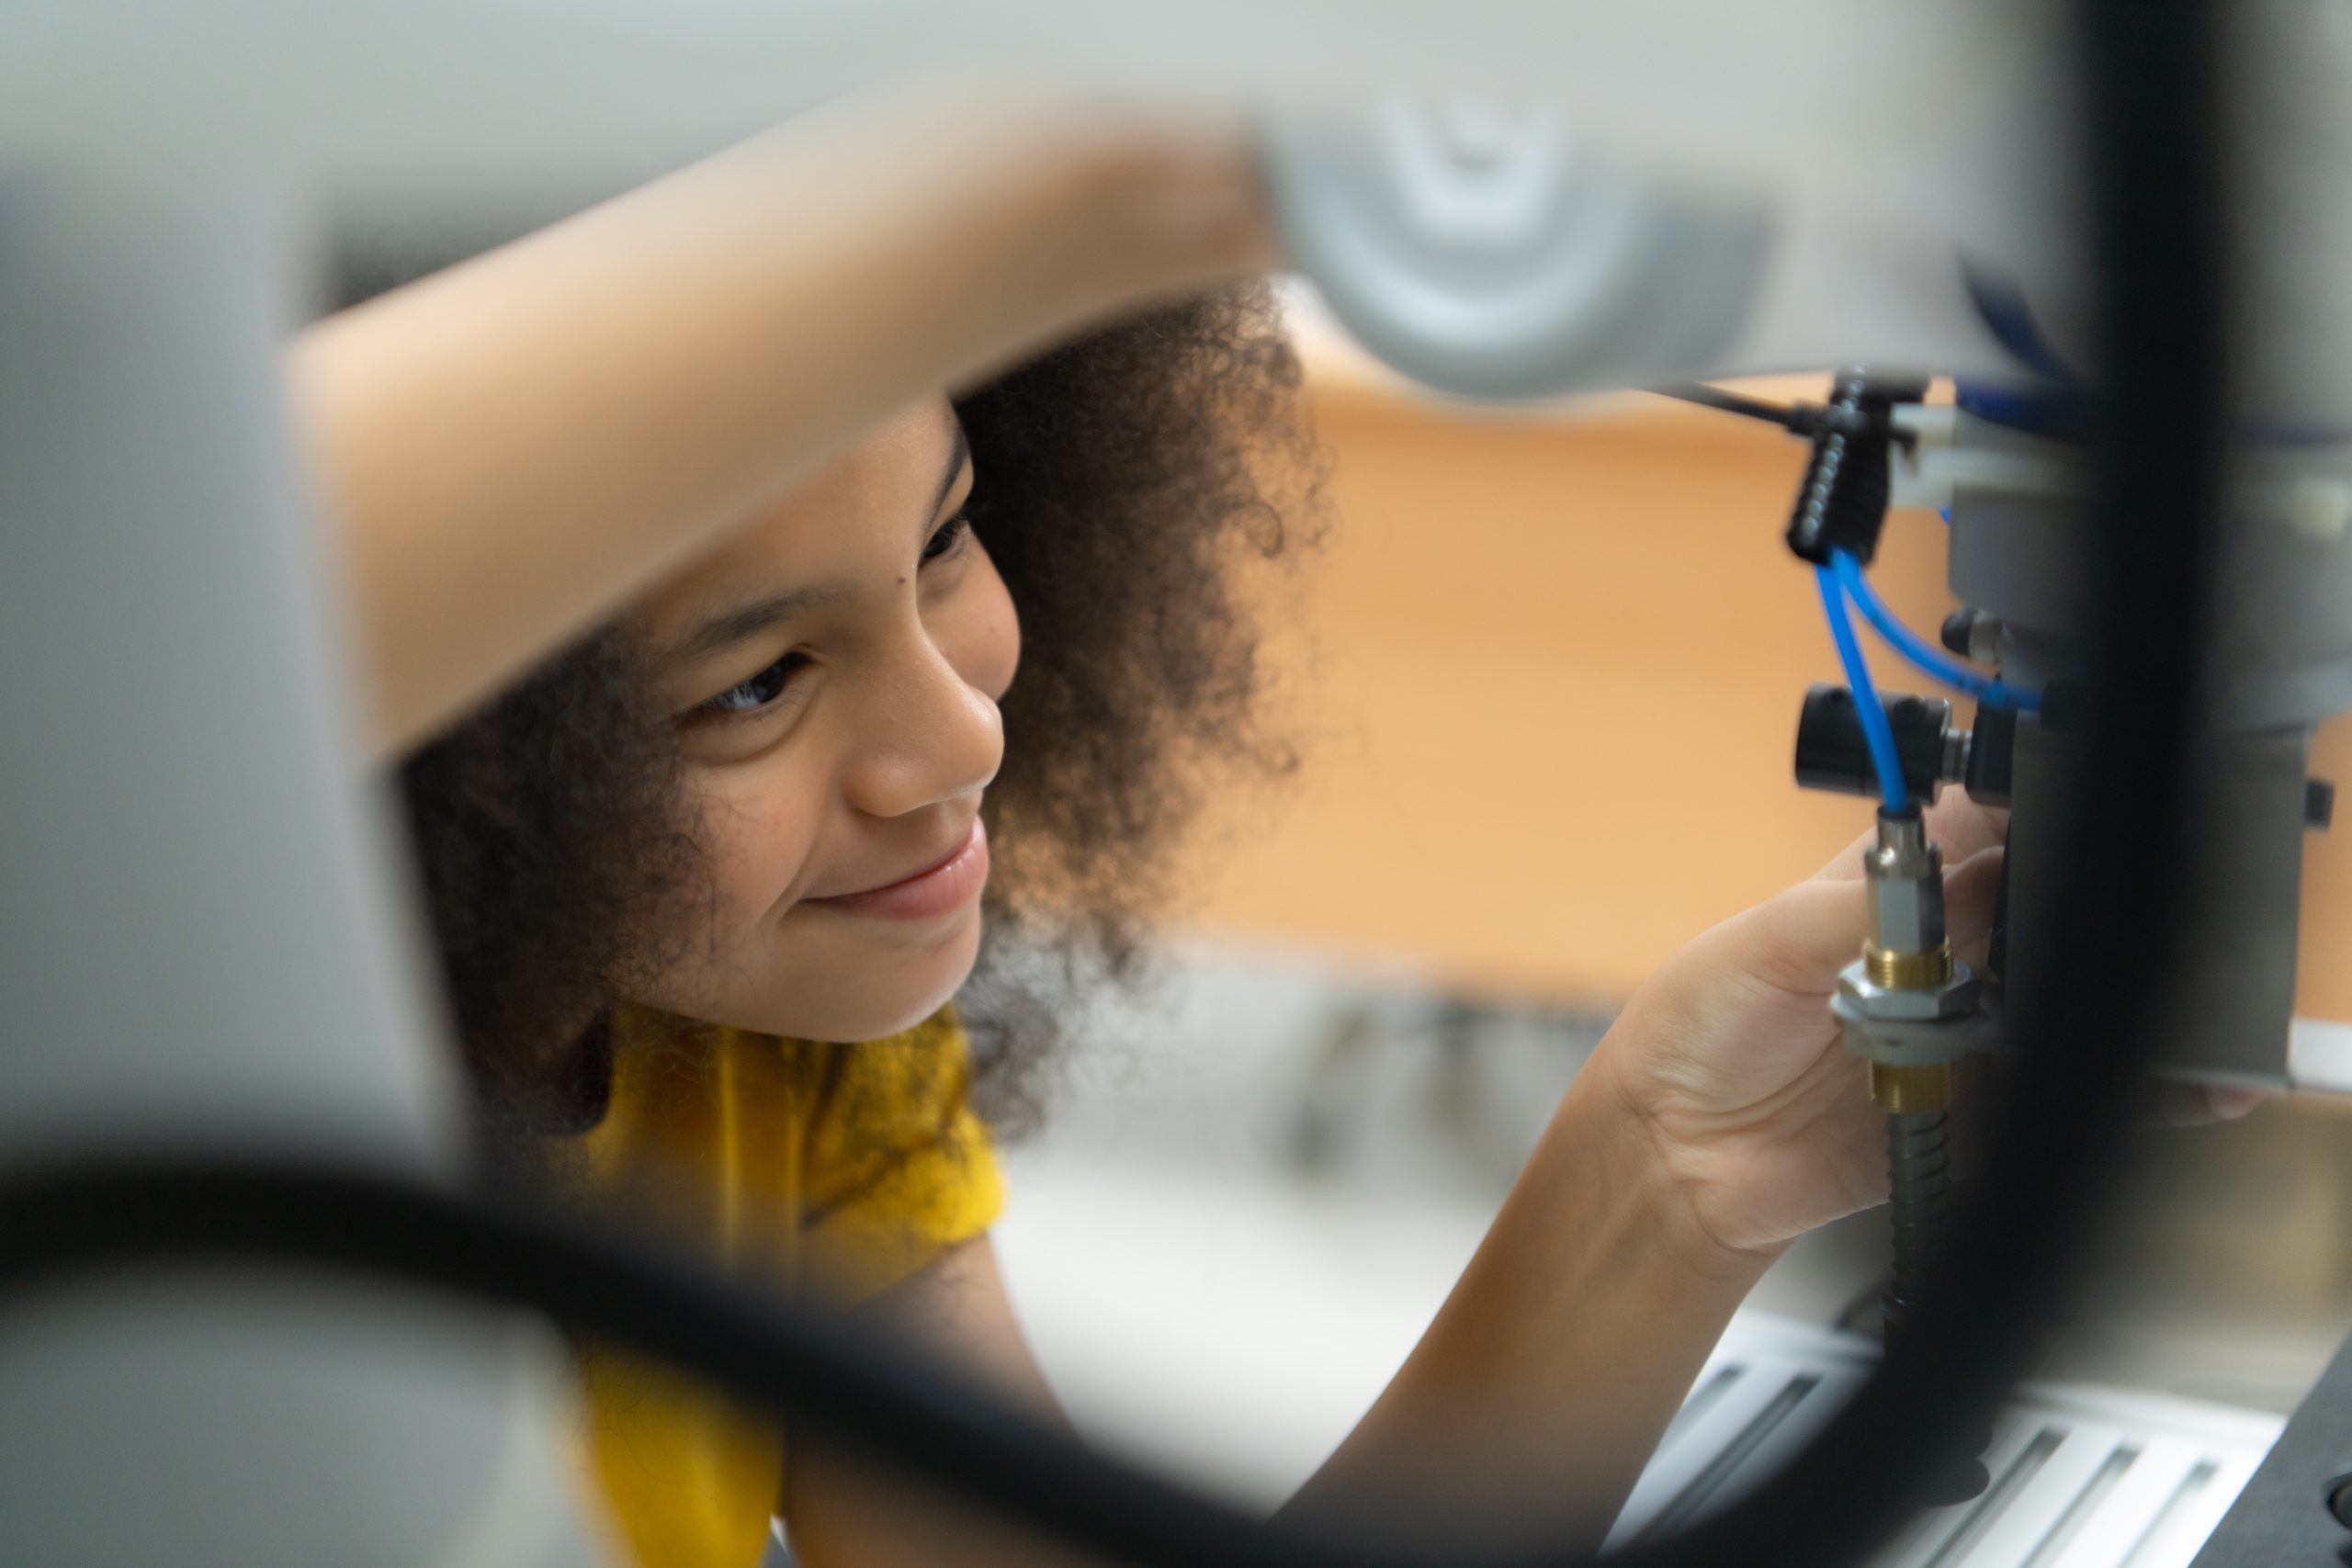 Robotics in education. From the classroom to the job